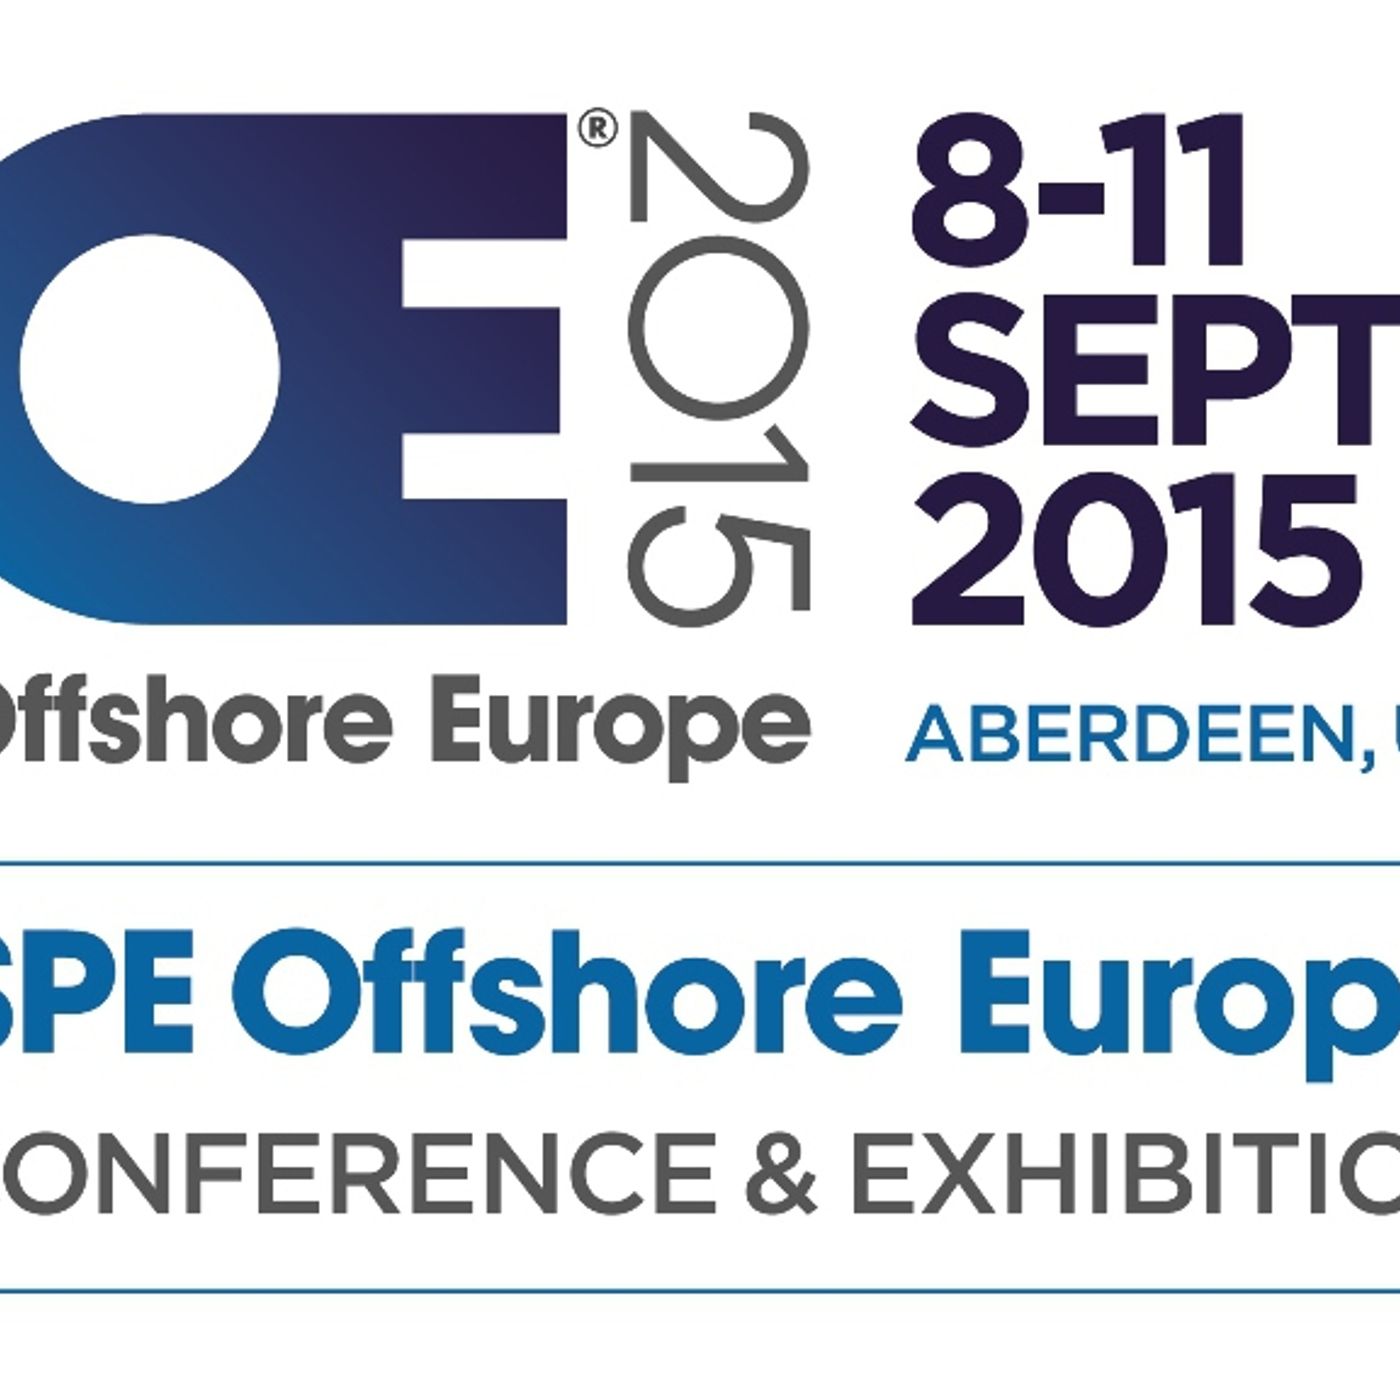 We preview Offshore Europe 2015